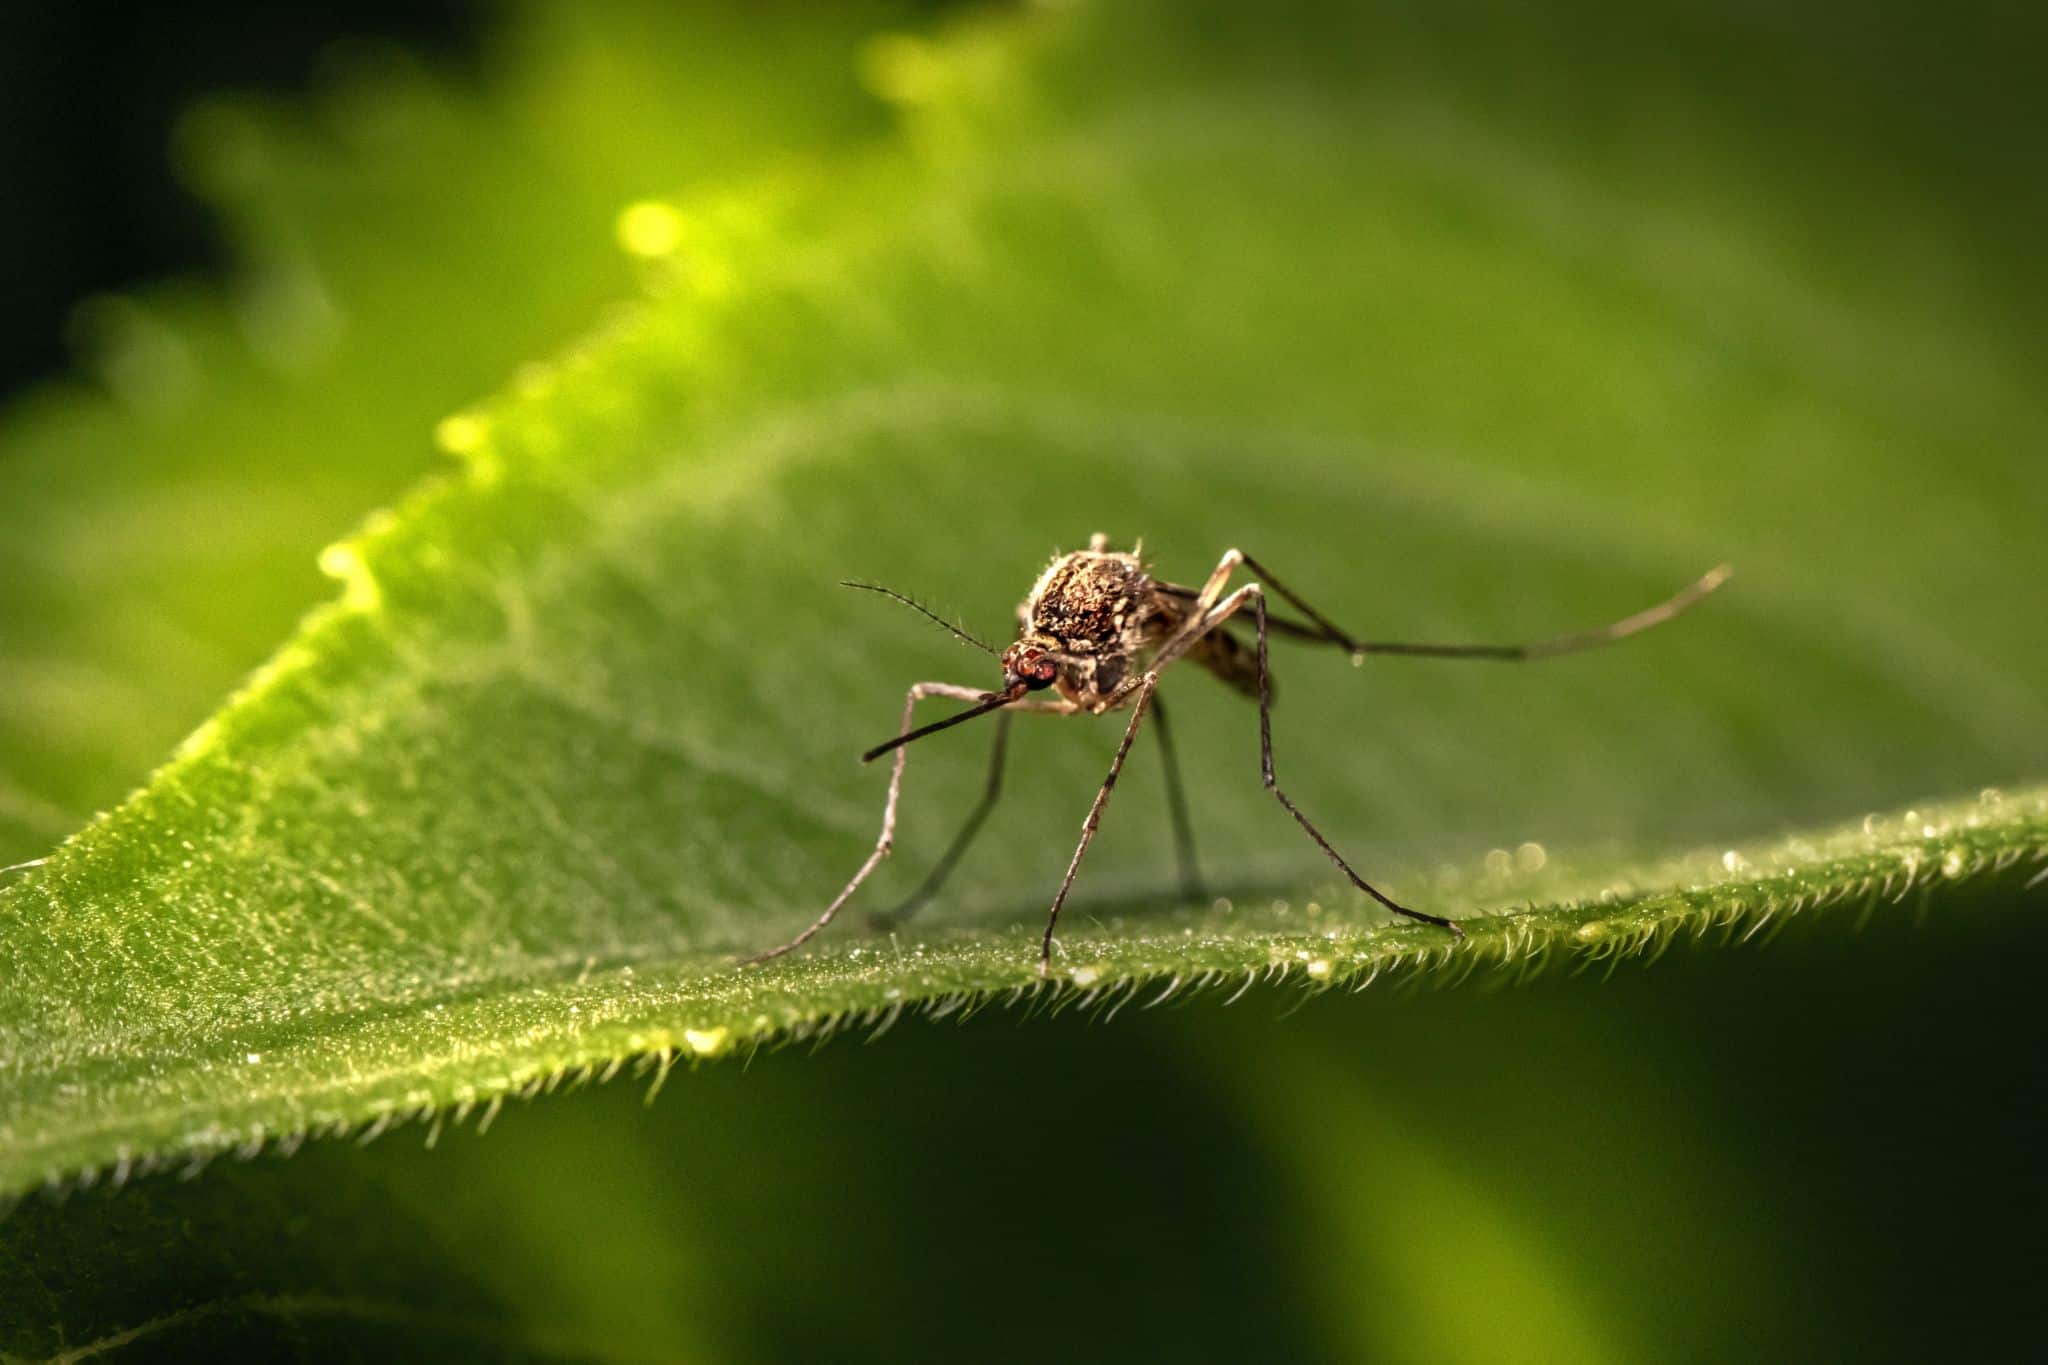 A mosquito on a leaf.